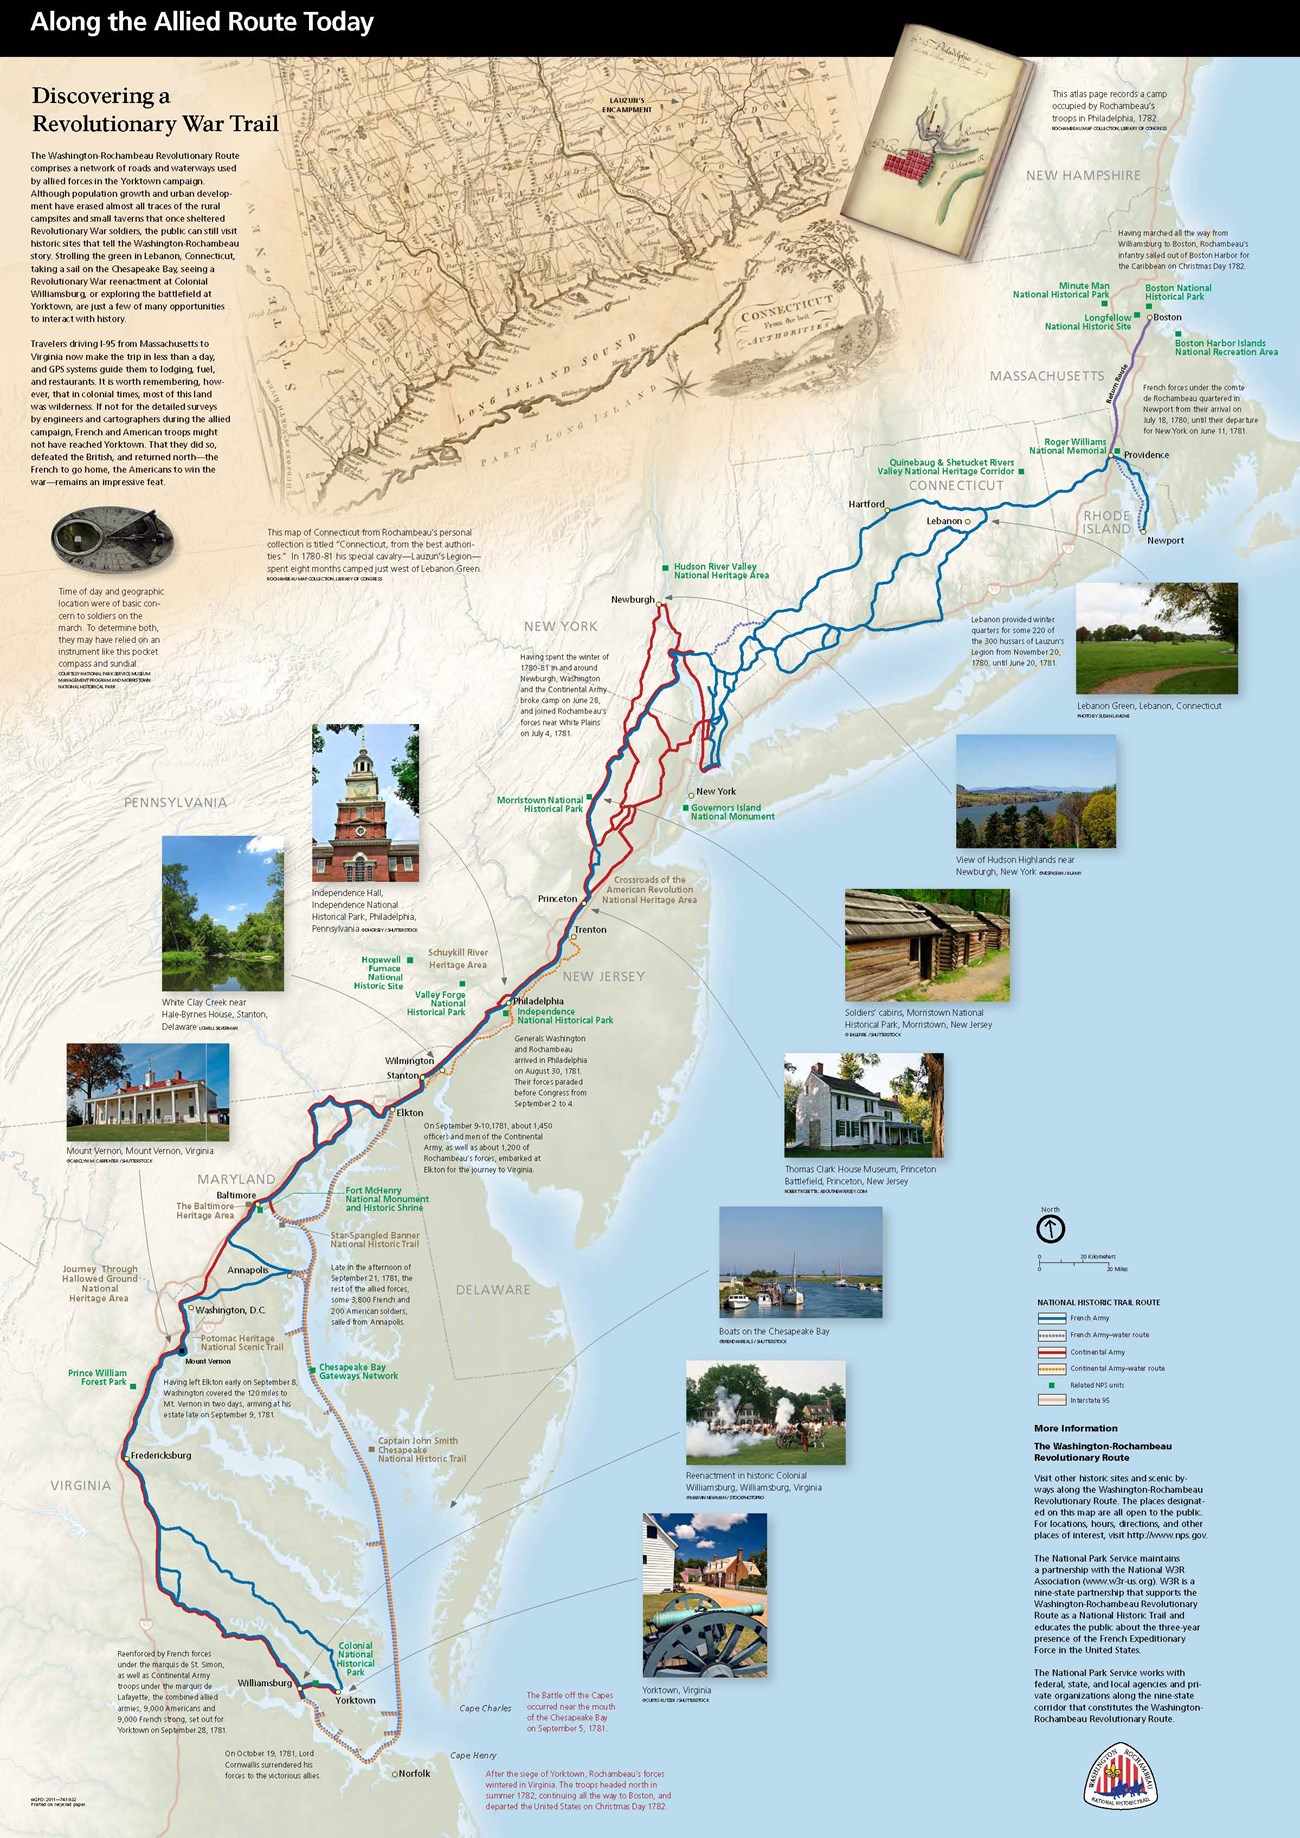 Along this Allied Route Today: Map from RI, to VA.  The Washington-Rochambeau Revolutionary Route comprises a network of roads and waterways used by allied forces in the Yorktown campaign. The public can still visit historic sites that tell the story.